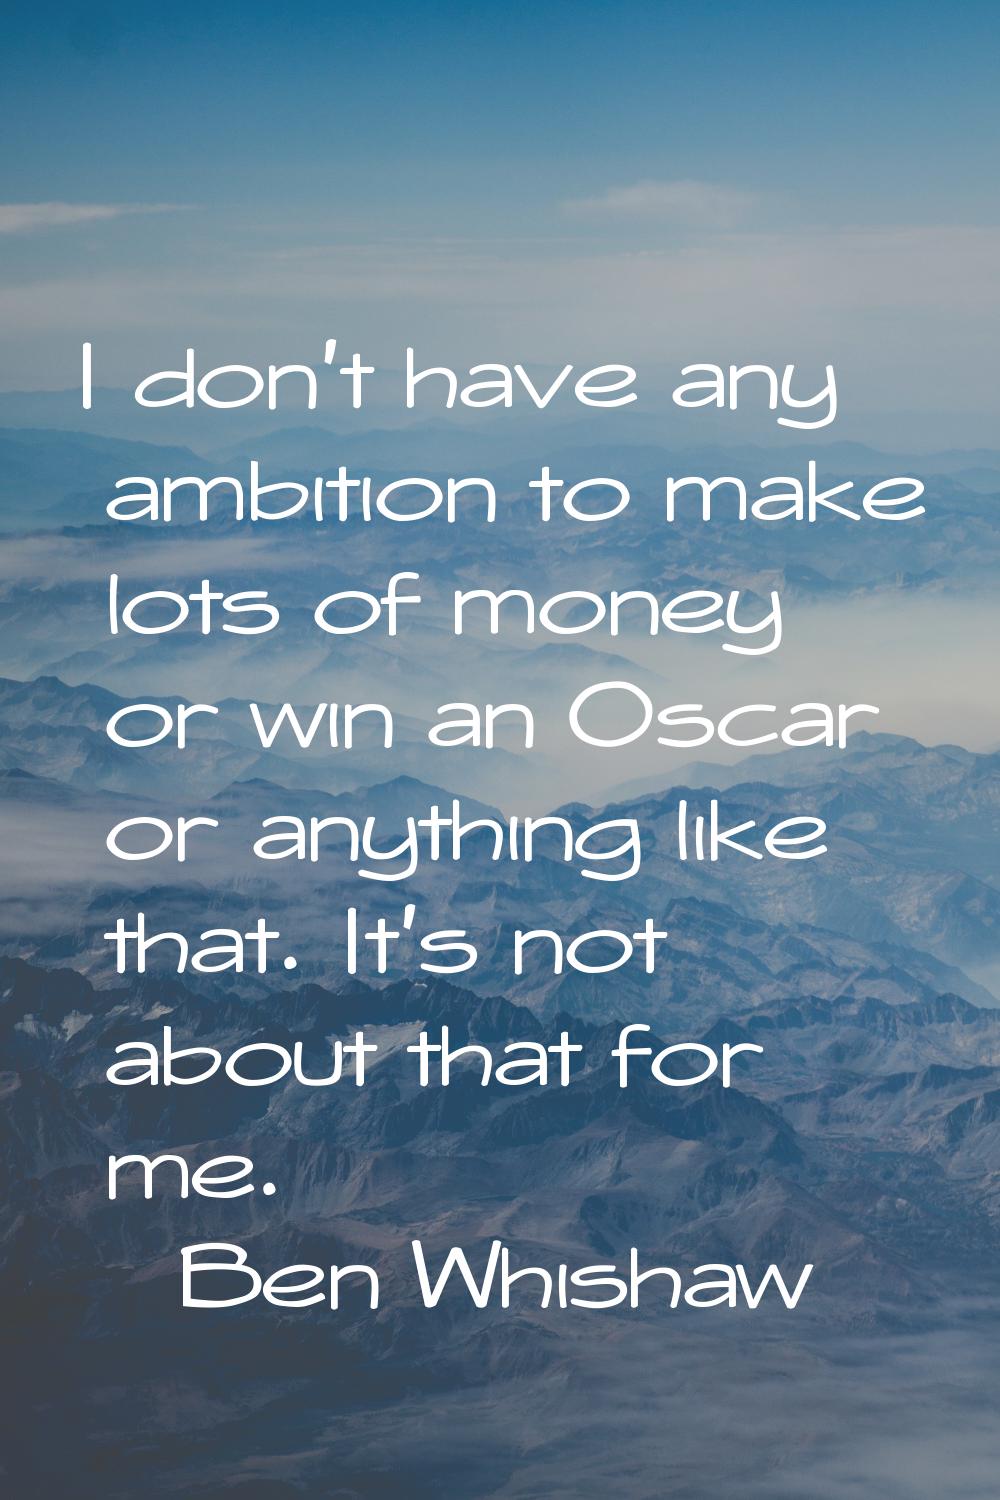 I don't have any ambition to make lots of money or win an Oscar or anything like that. It's not abo